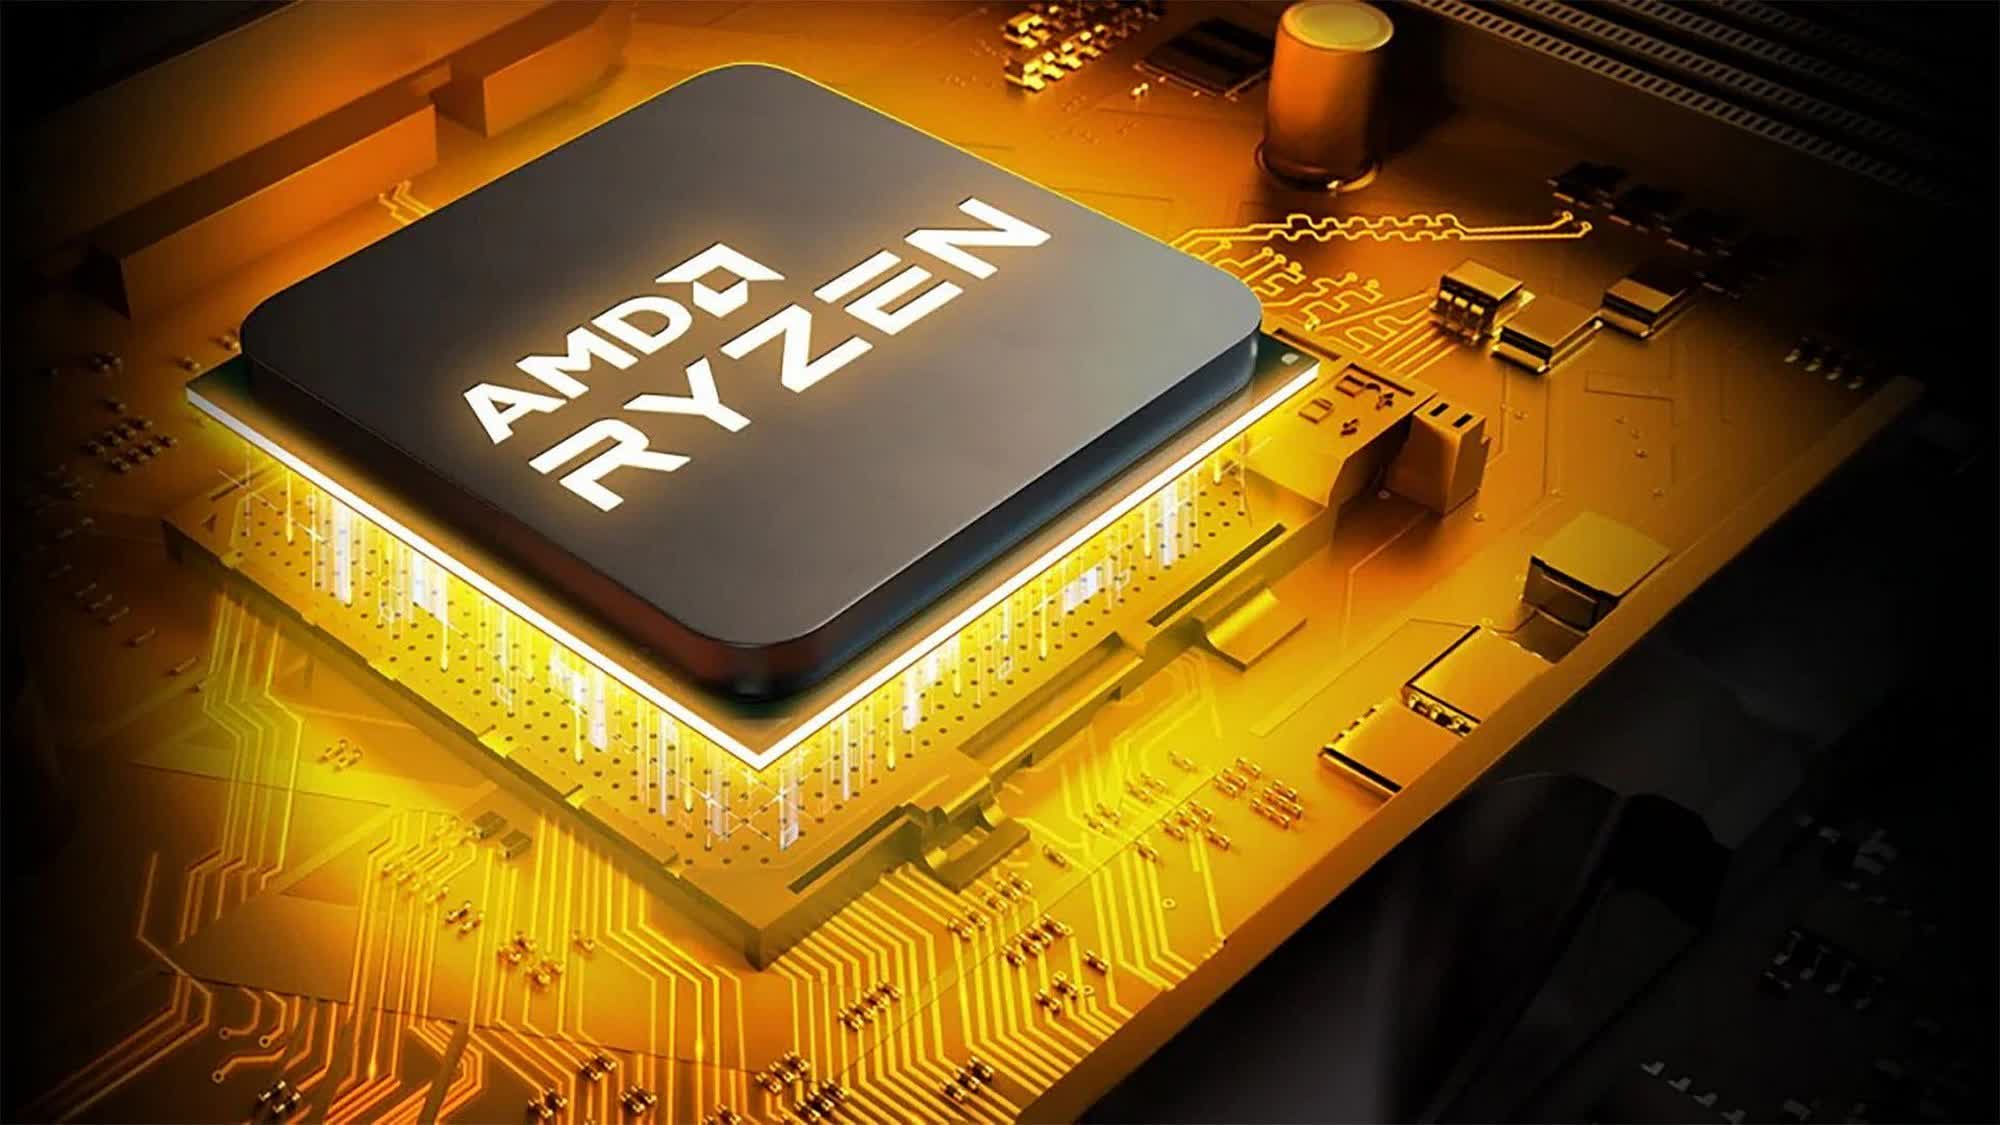 Father of AMD's Zen architecture says Zen 5 will offer massive performance gains